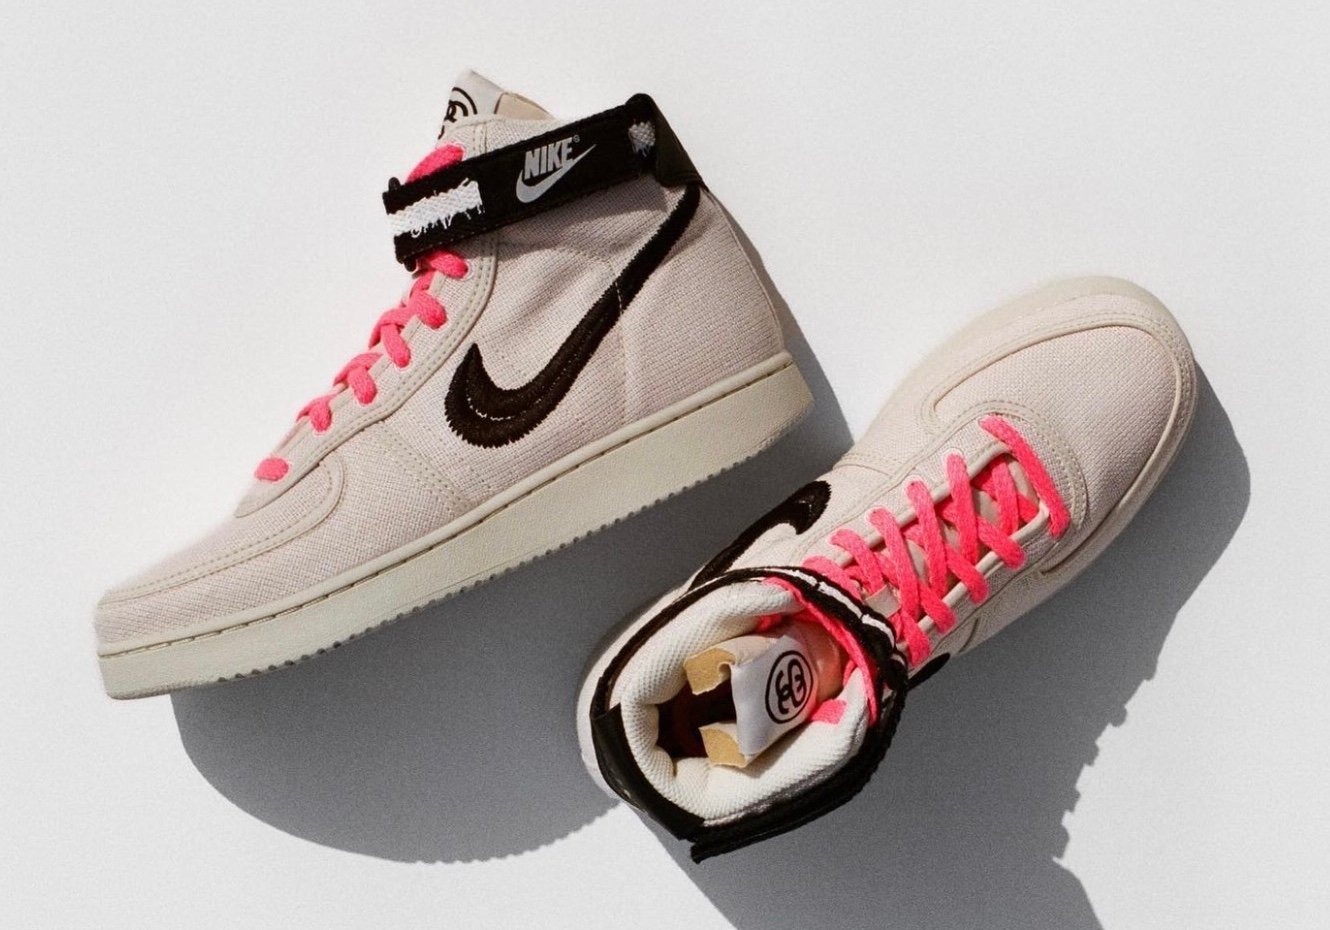 Stussy Nike Vandal High Fossil Release Date